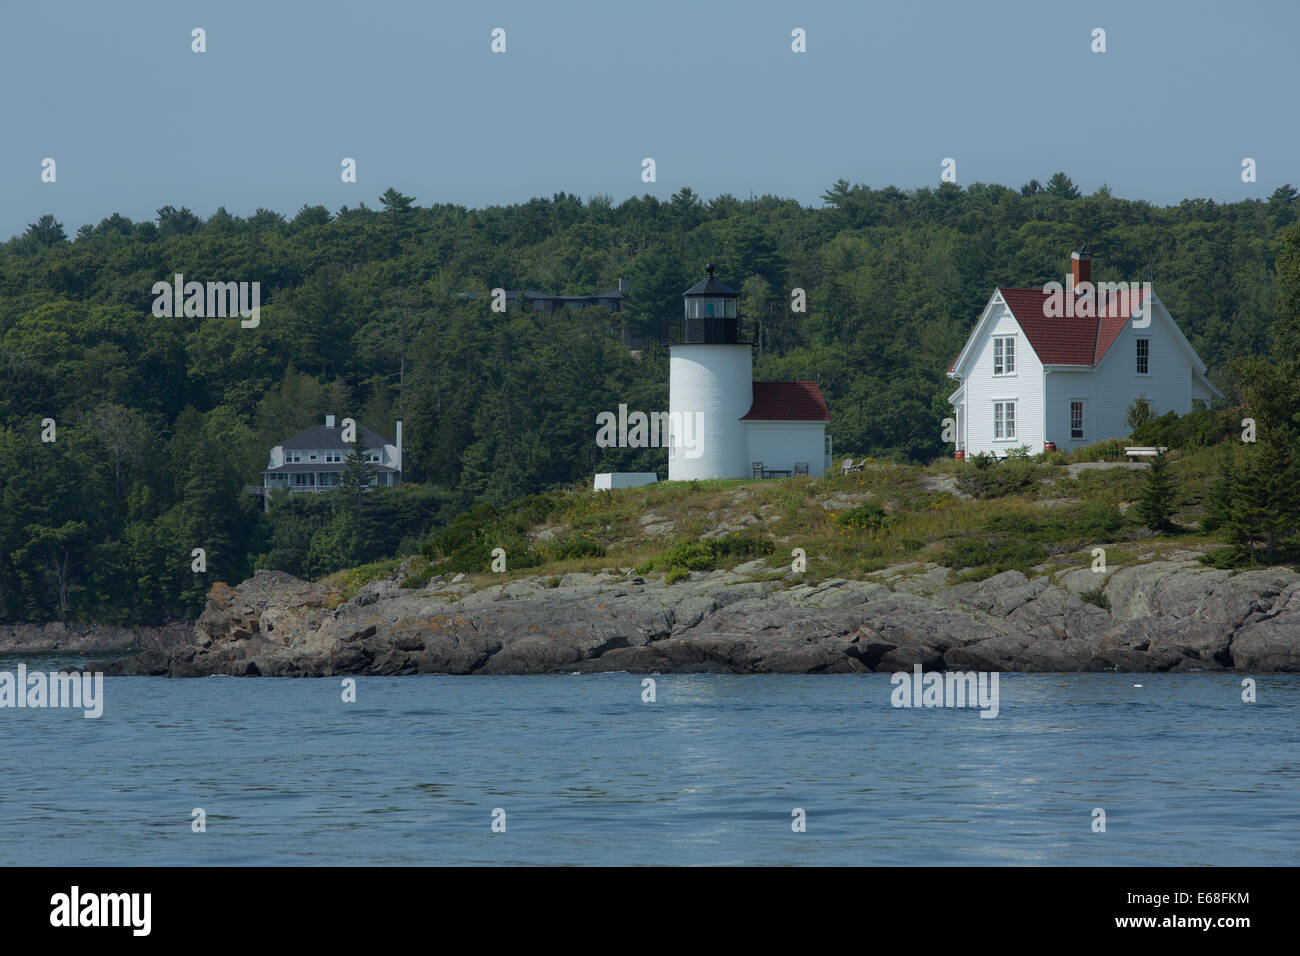 Camden, ME - 11 August 2014. Curtis Island light at the entrance to Camden. The lighthouse is owned and maintained by the town. Stock Photo